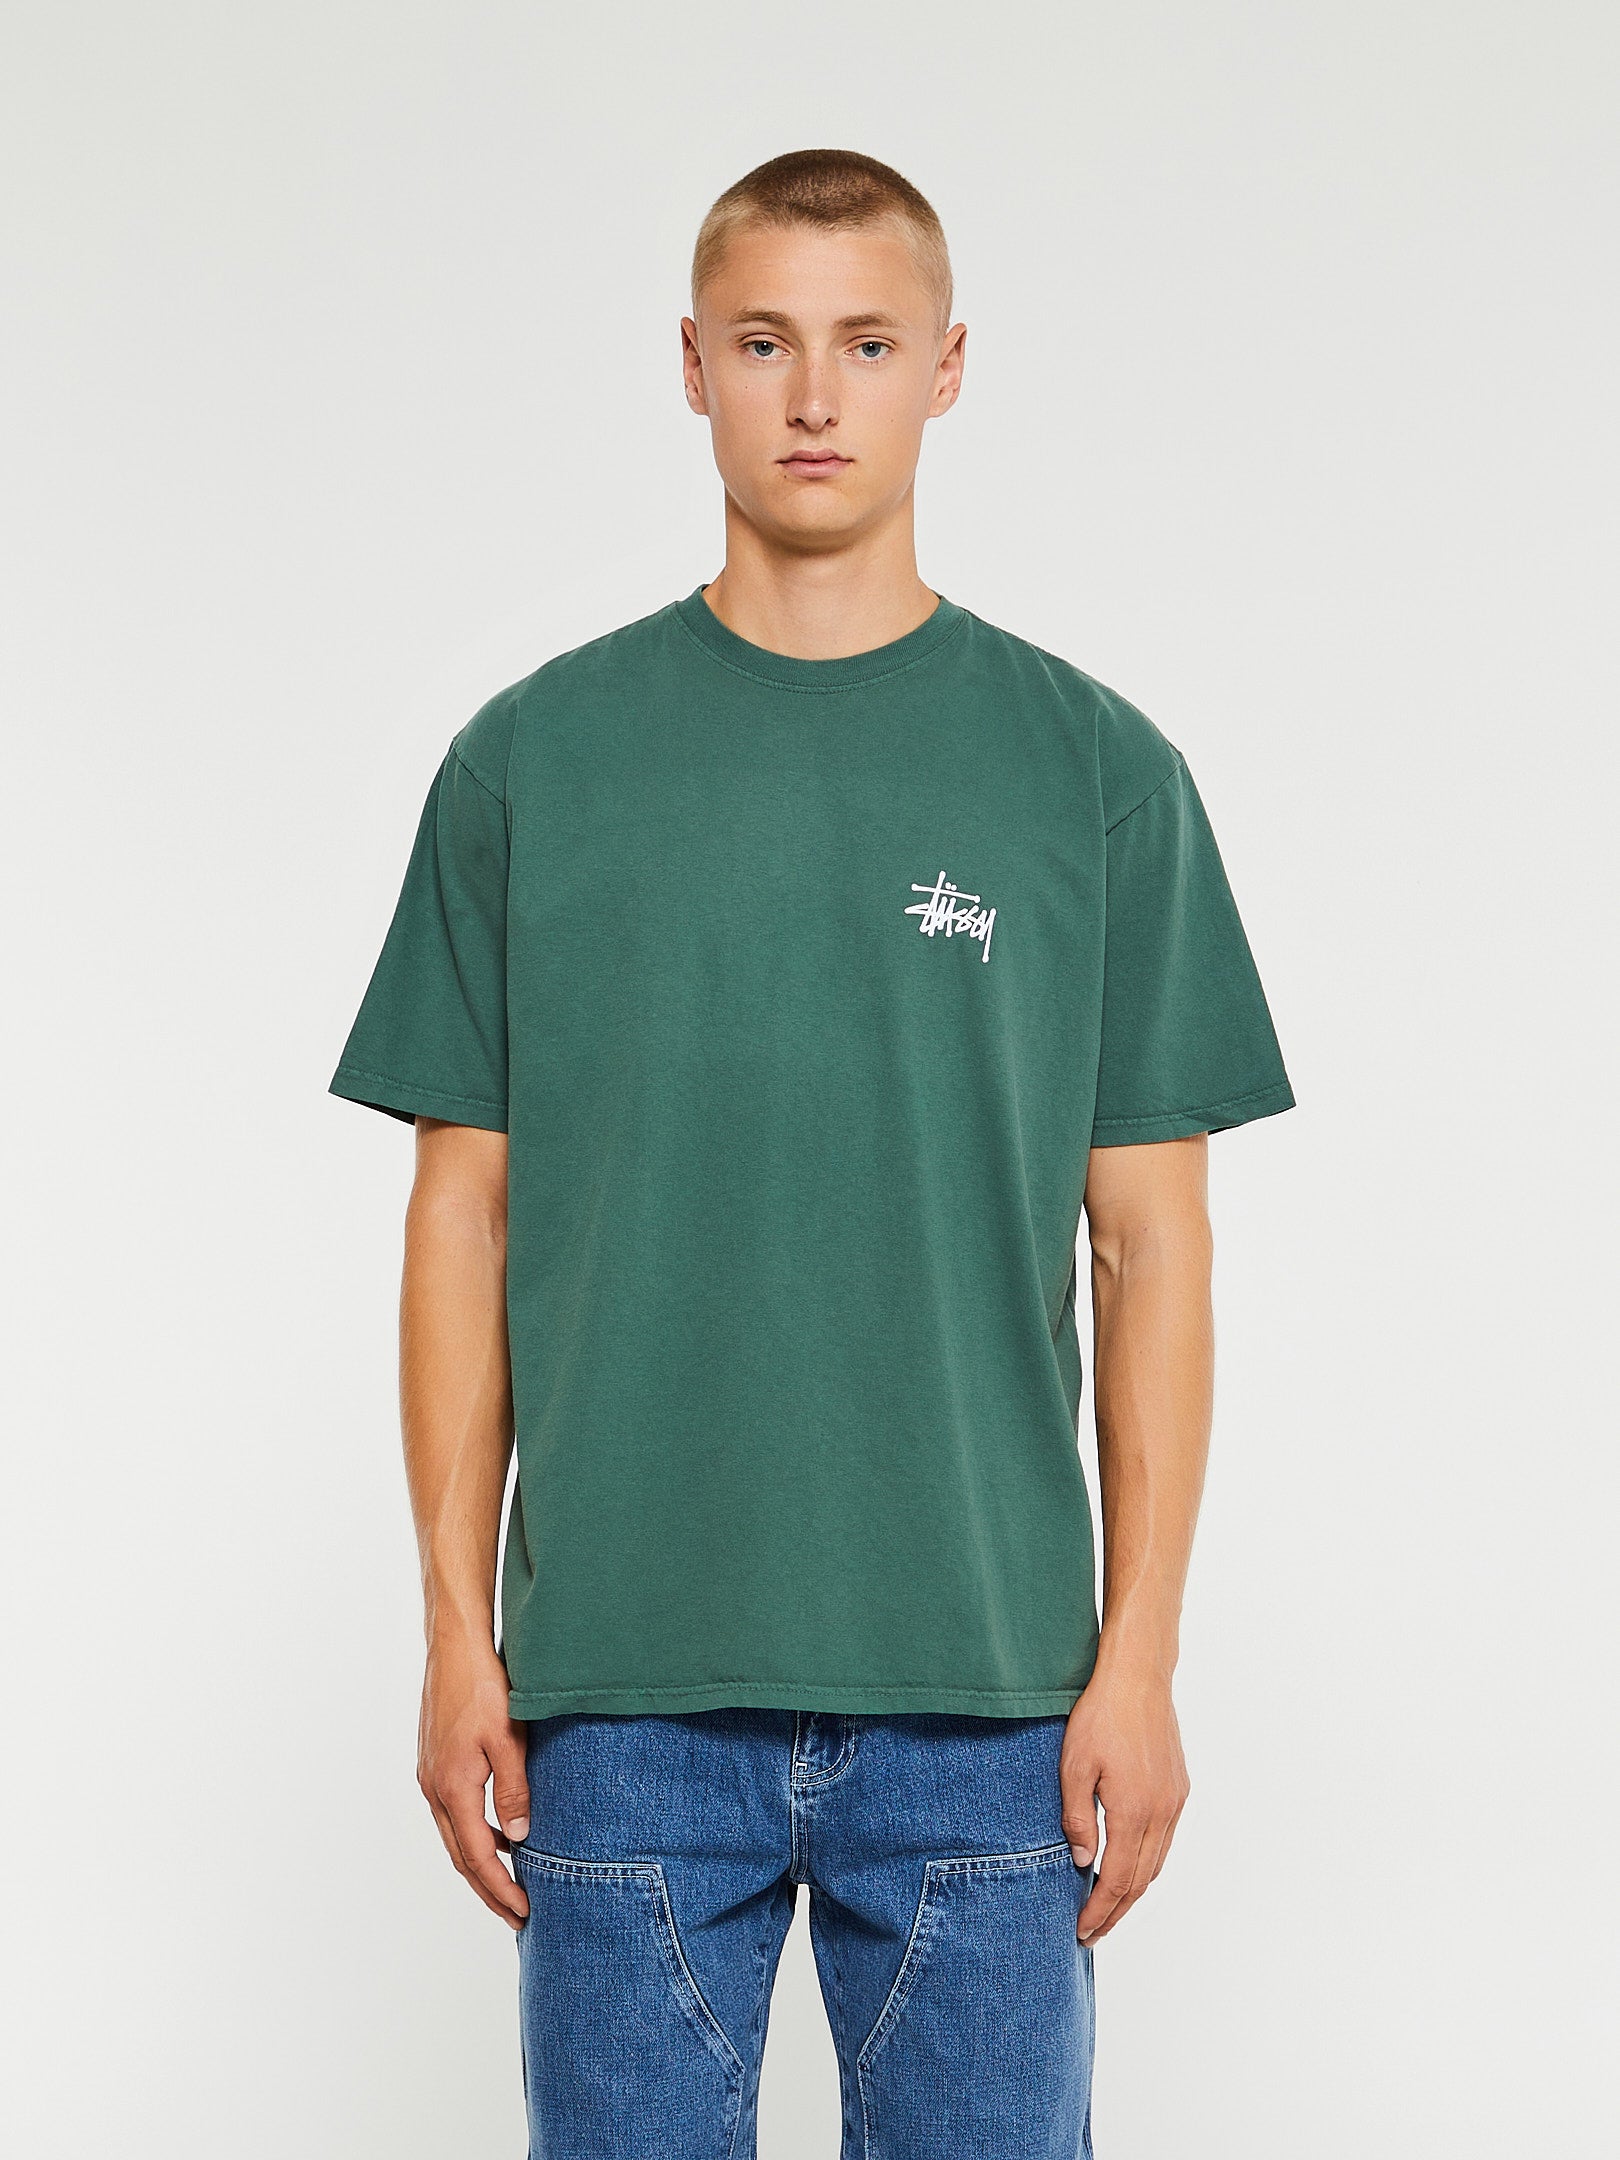 Stüssy - Basic Pigment Dyed T-Shirt in Forest